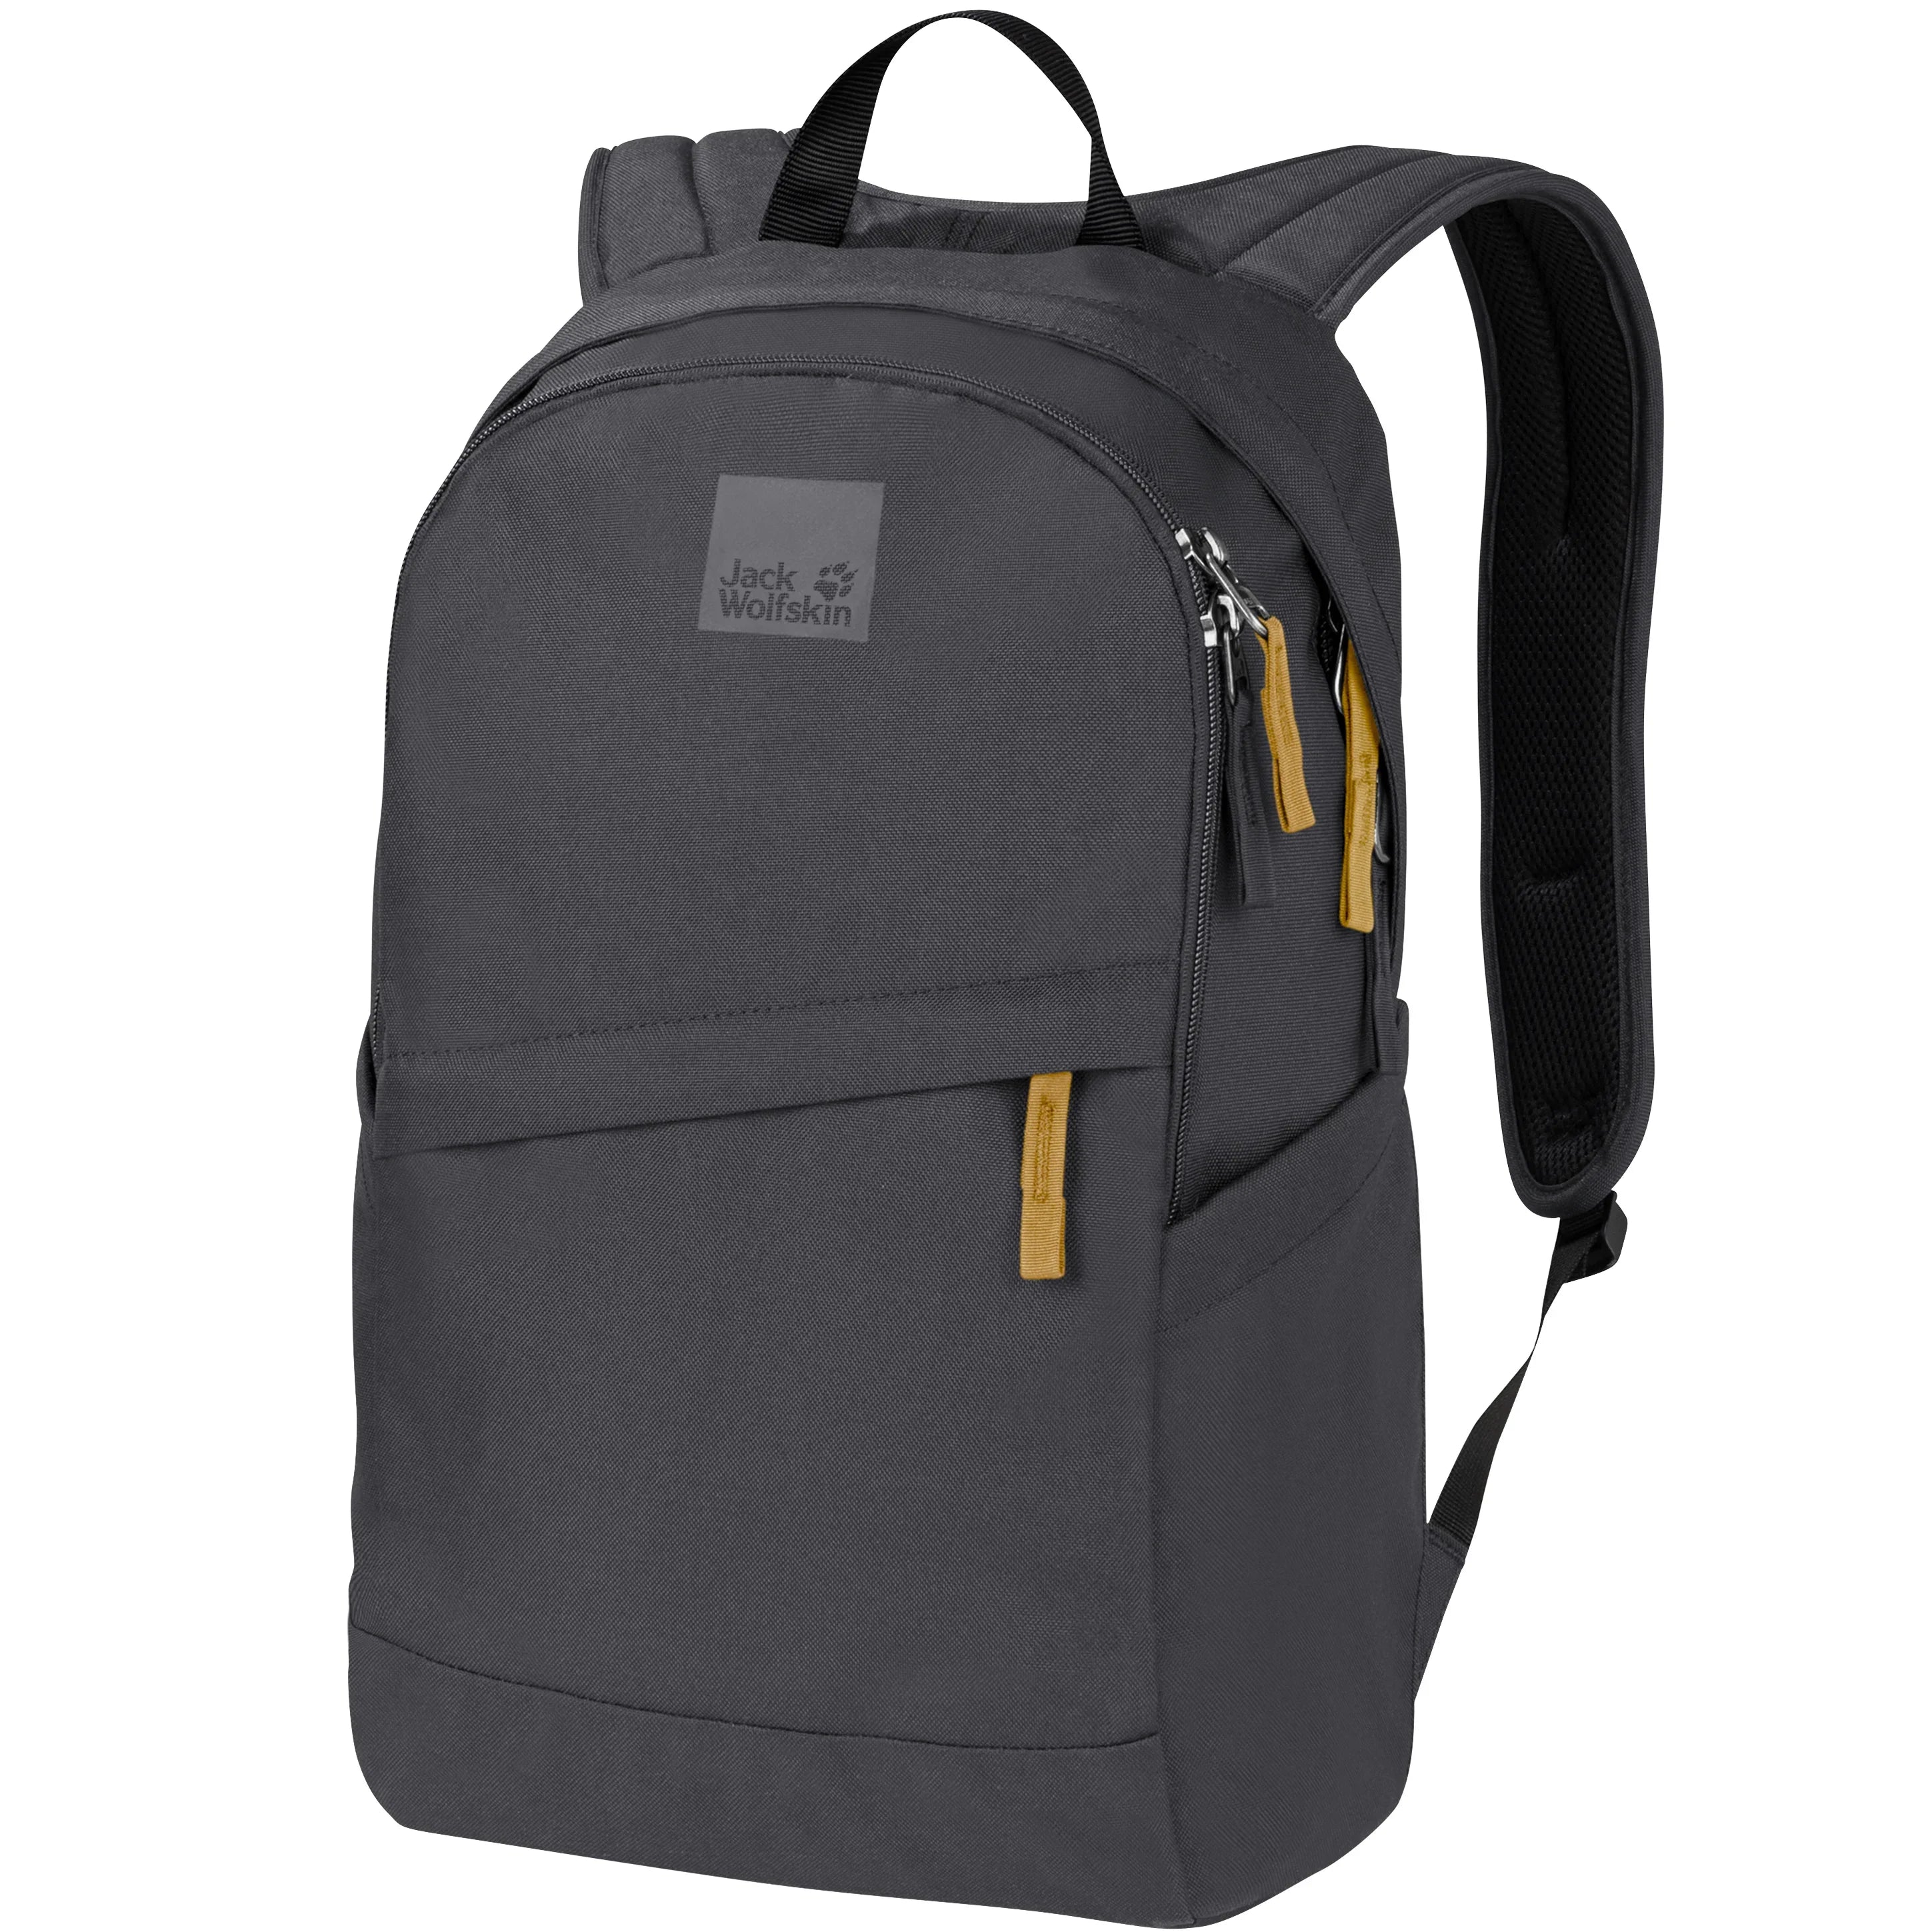 bags travel companions for daypacks life perfect & - and Jack everyday Wolfskin